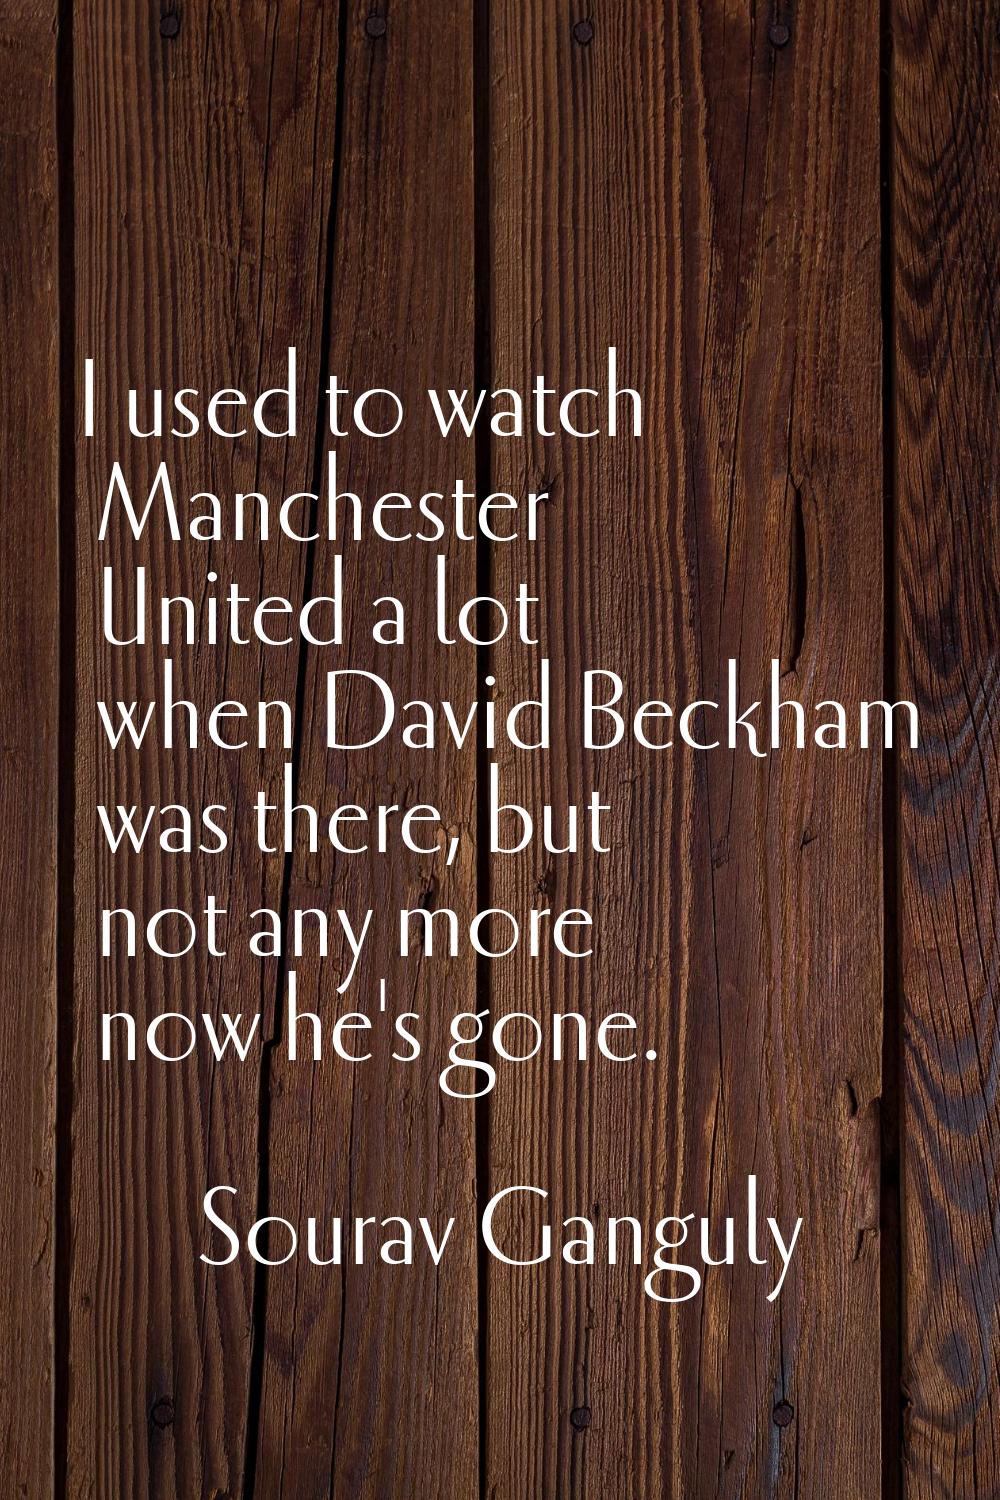 I used to watch Manchester United a lot when David Beckham was there, but not any more now he's gon